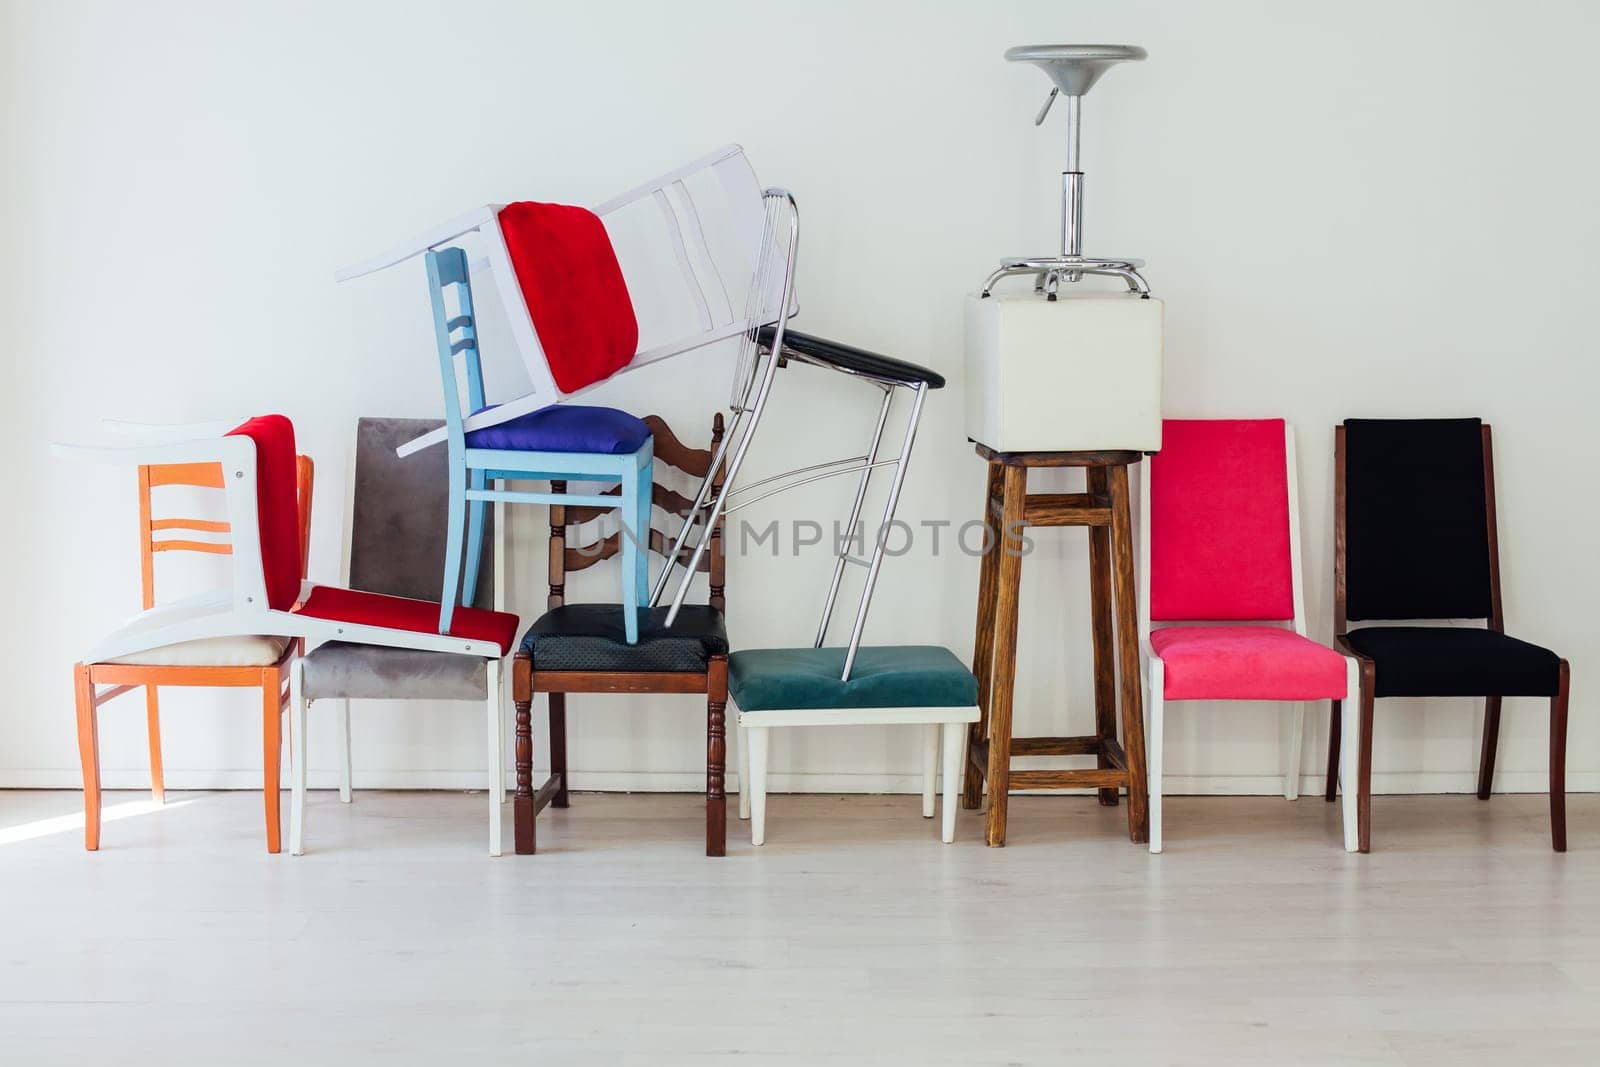 many different chairs in disarray in the interior of an empty white room